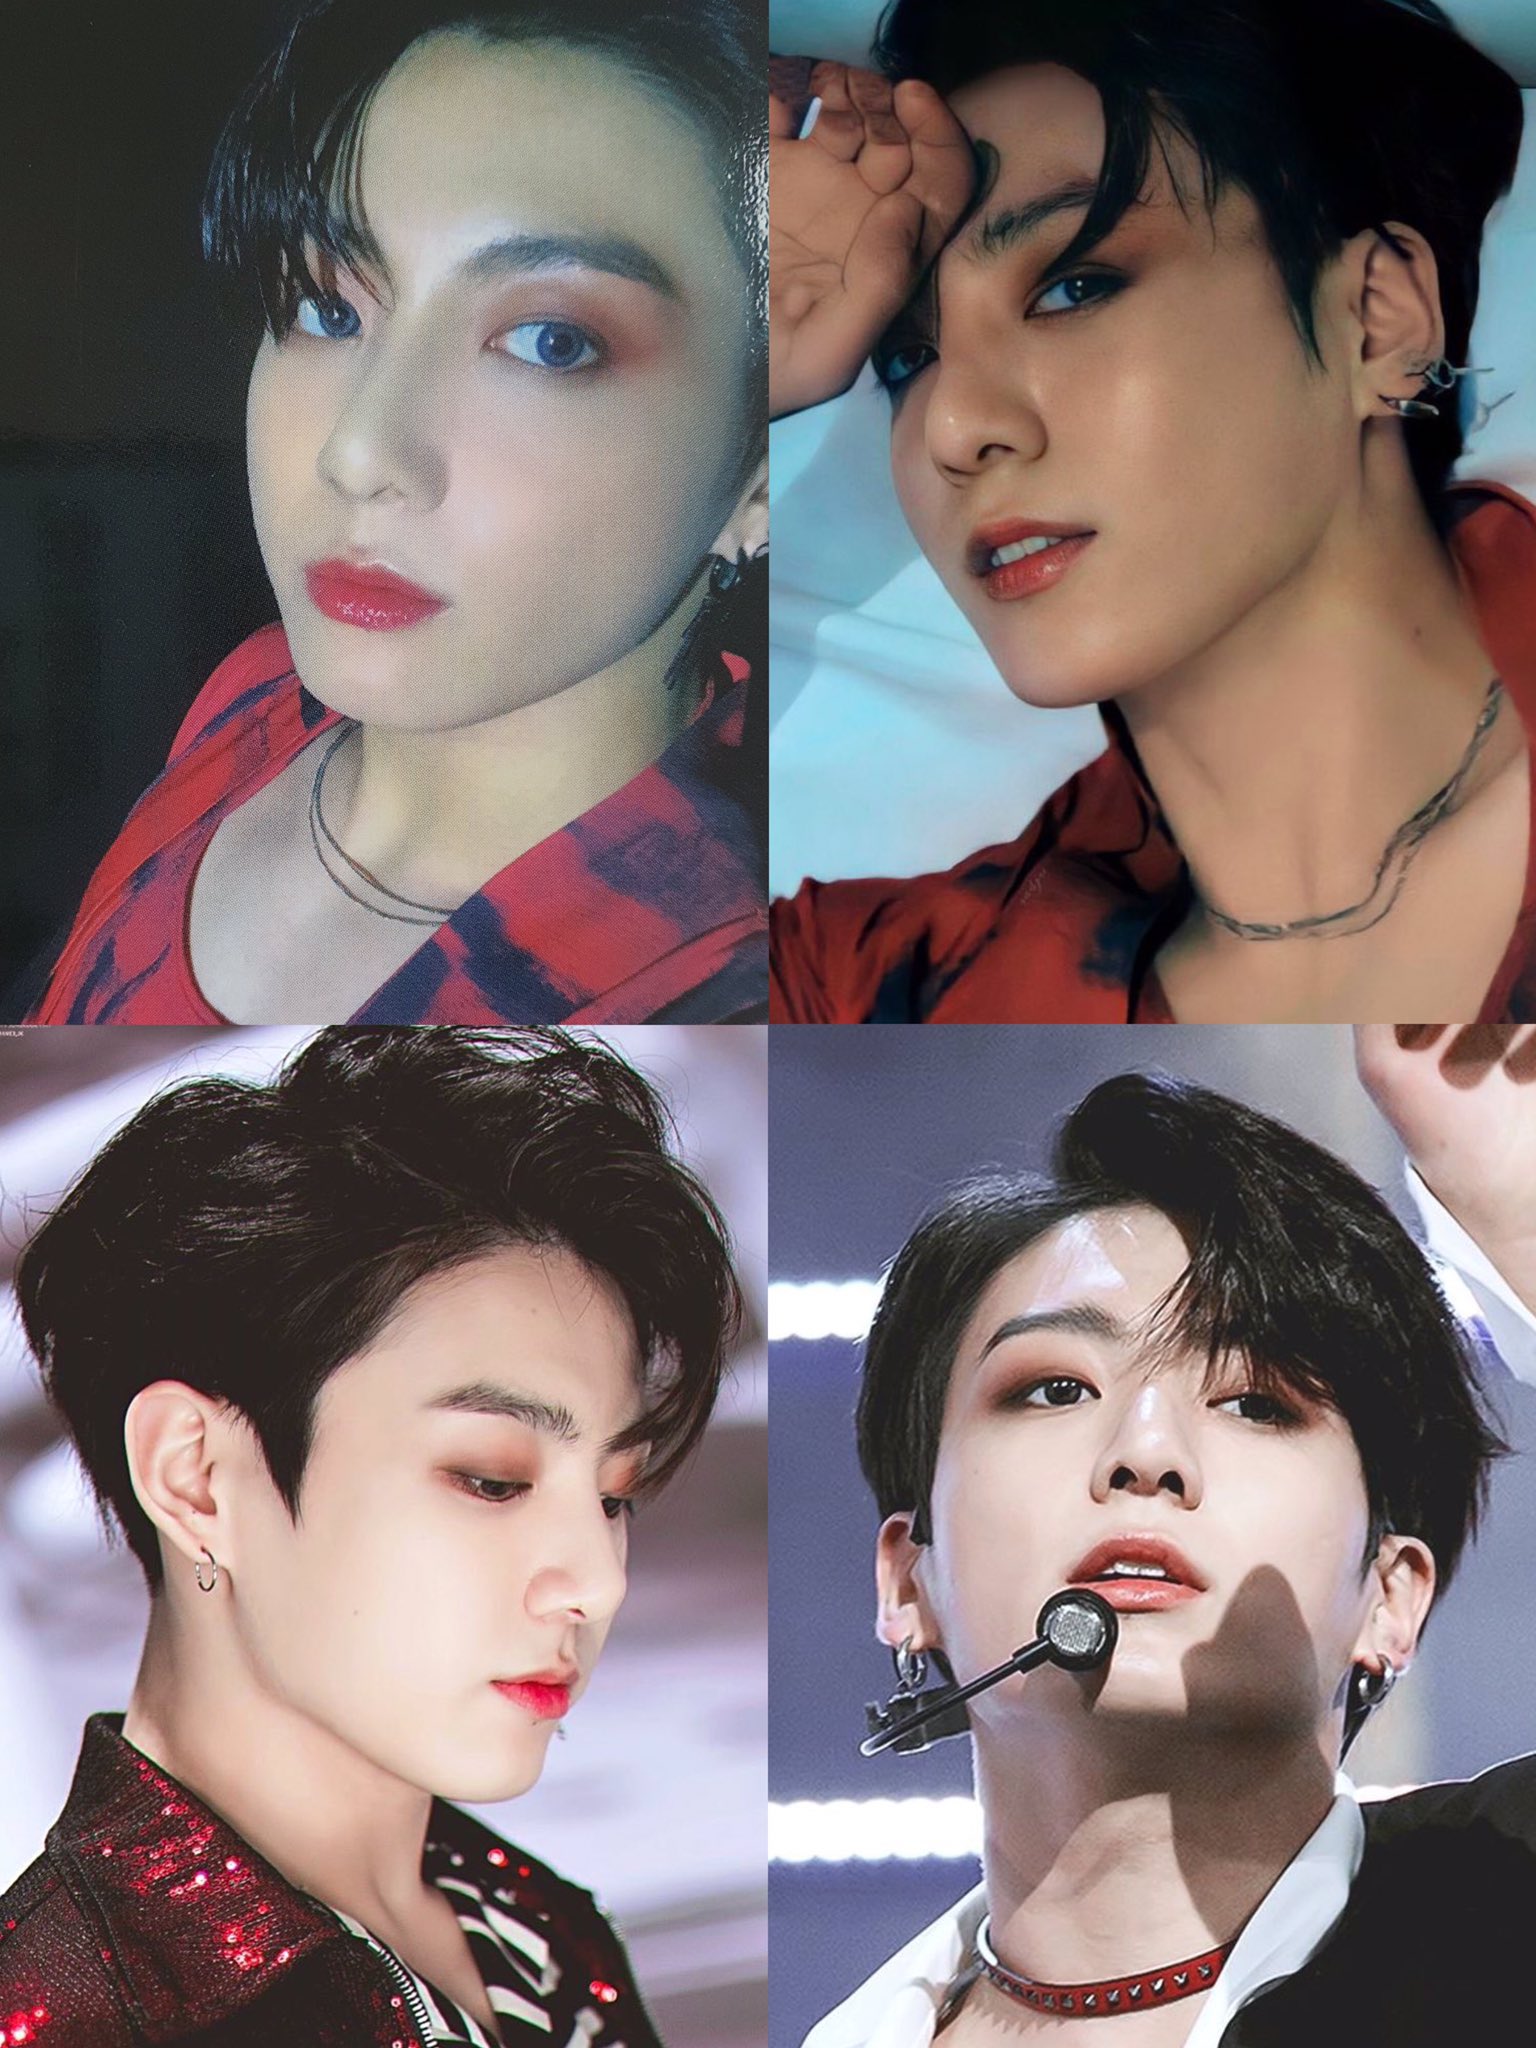 ⊹ 𓂋 on Twitter: "jungkook with smokey makeup and everything https://t.co/UvWrjiQOPp" / Twitter